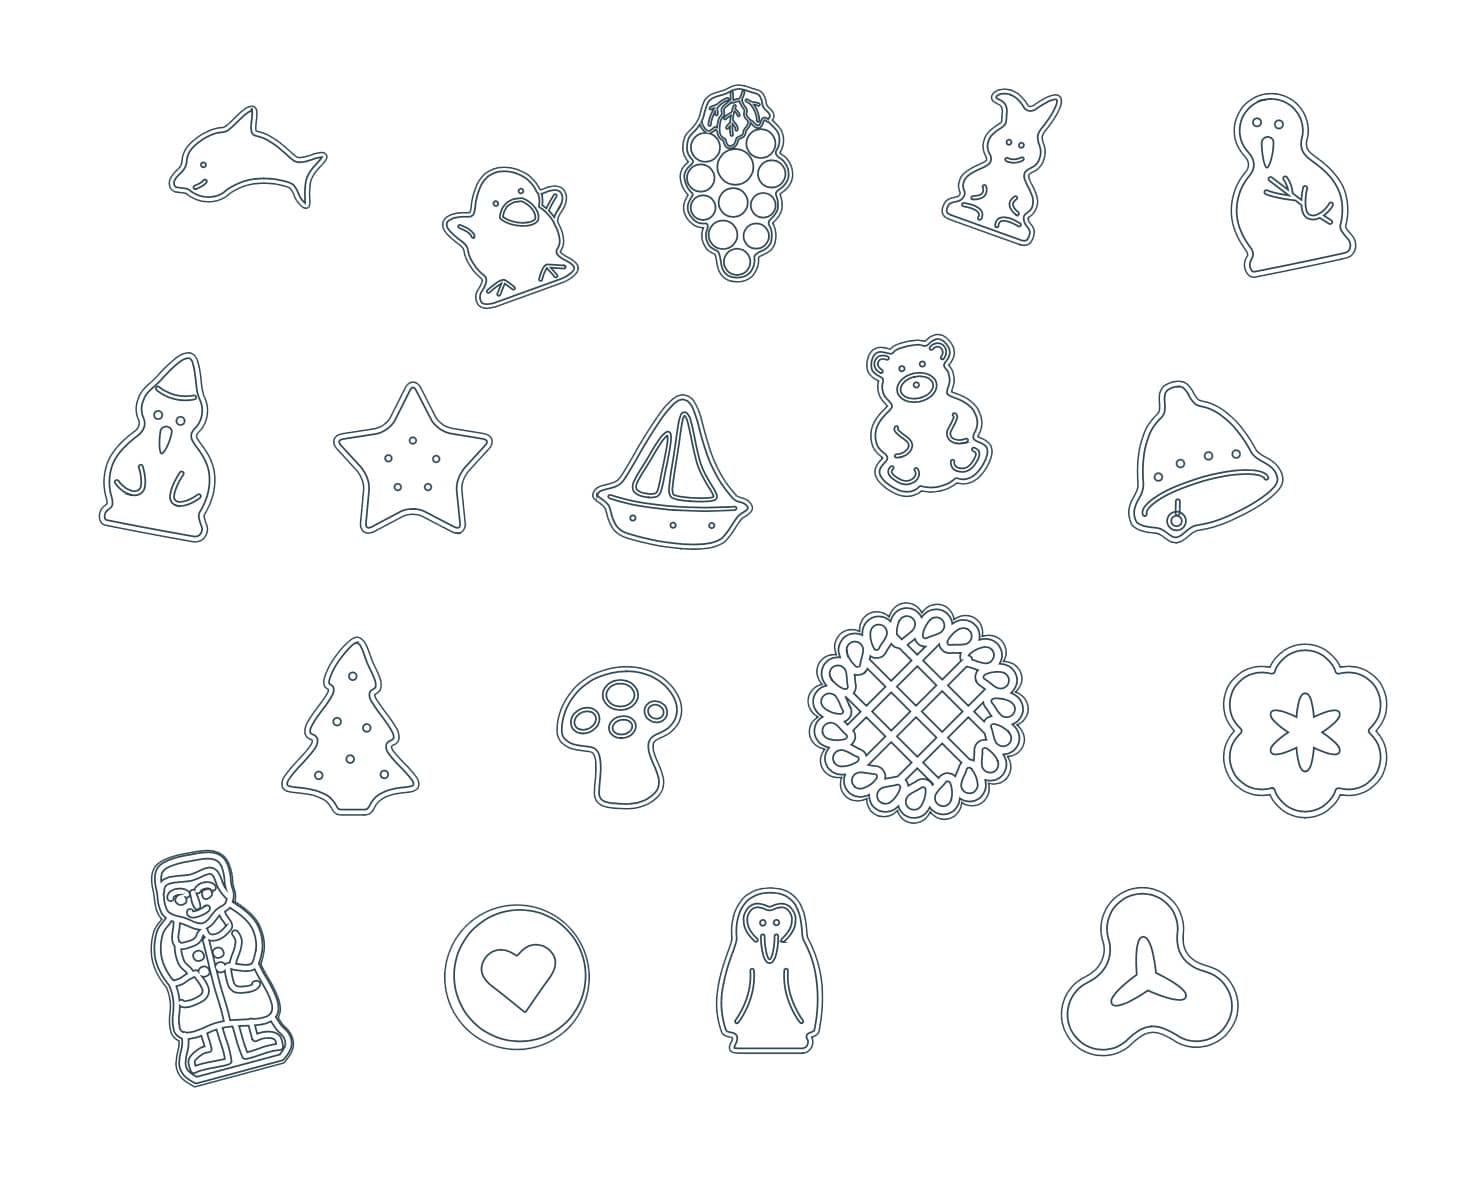 View of various cookie motifs